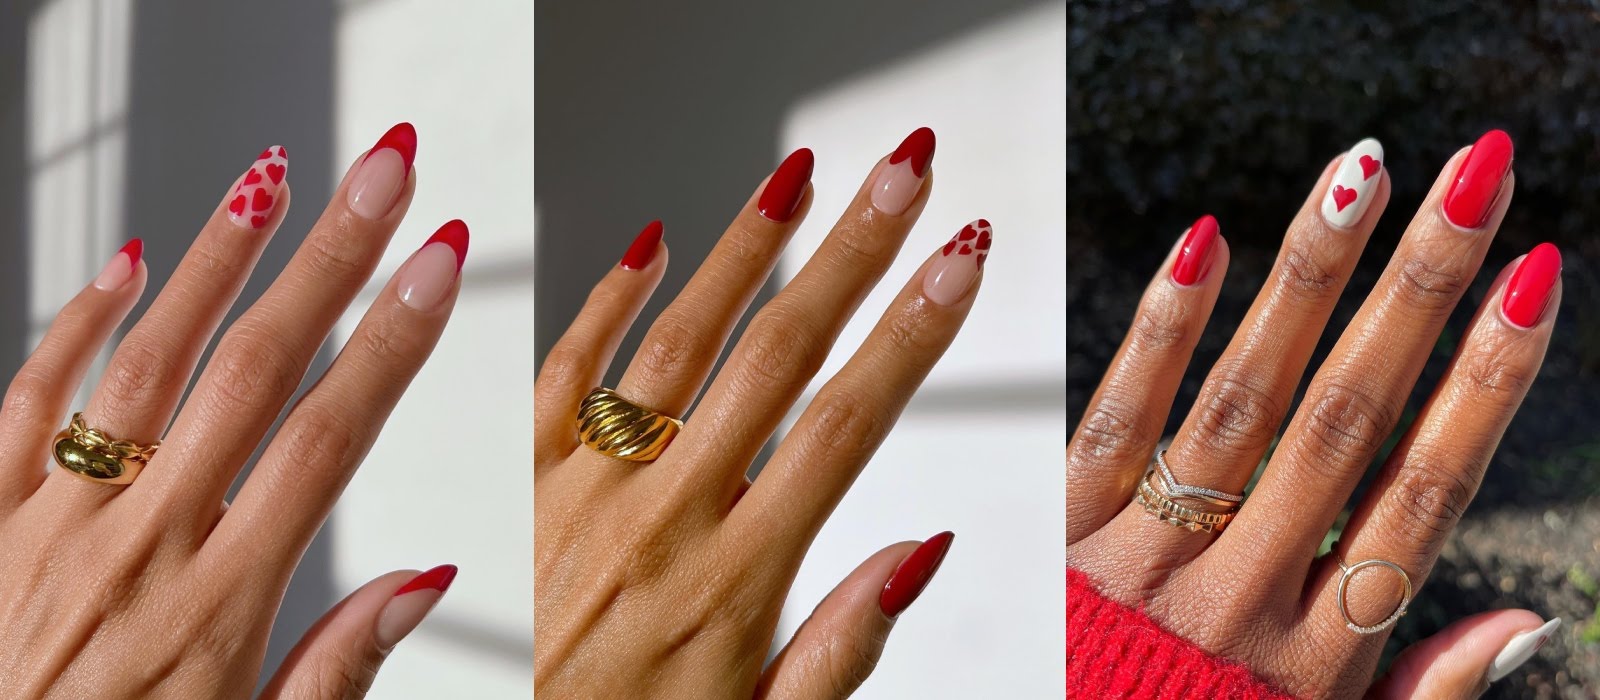 Valentine’s Day nail inspiration to screenshot or try at home